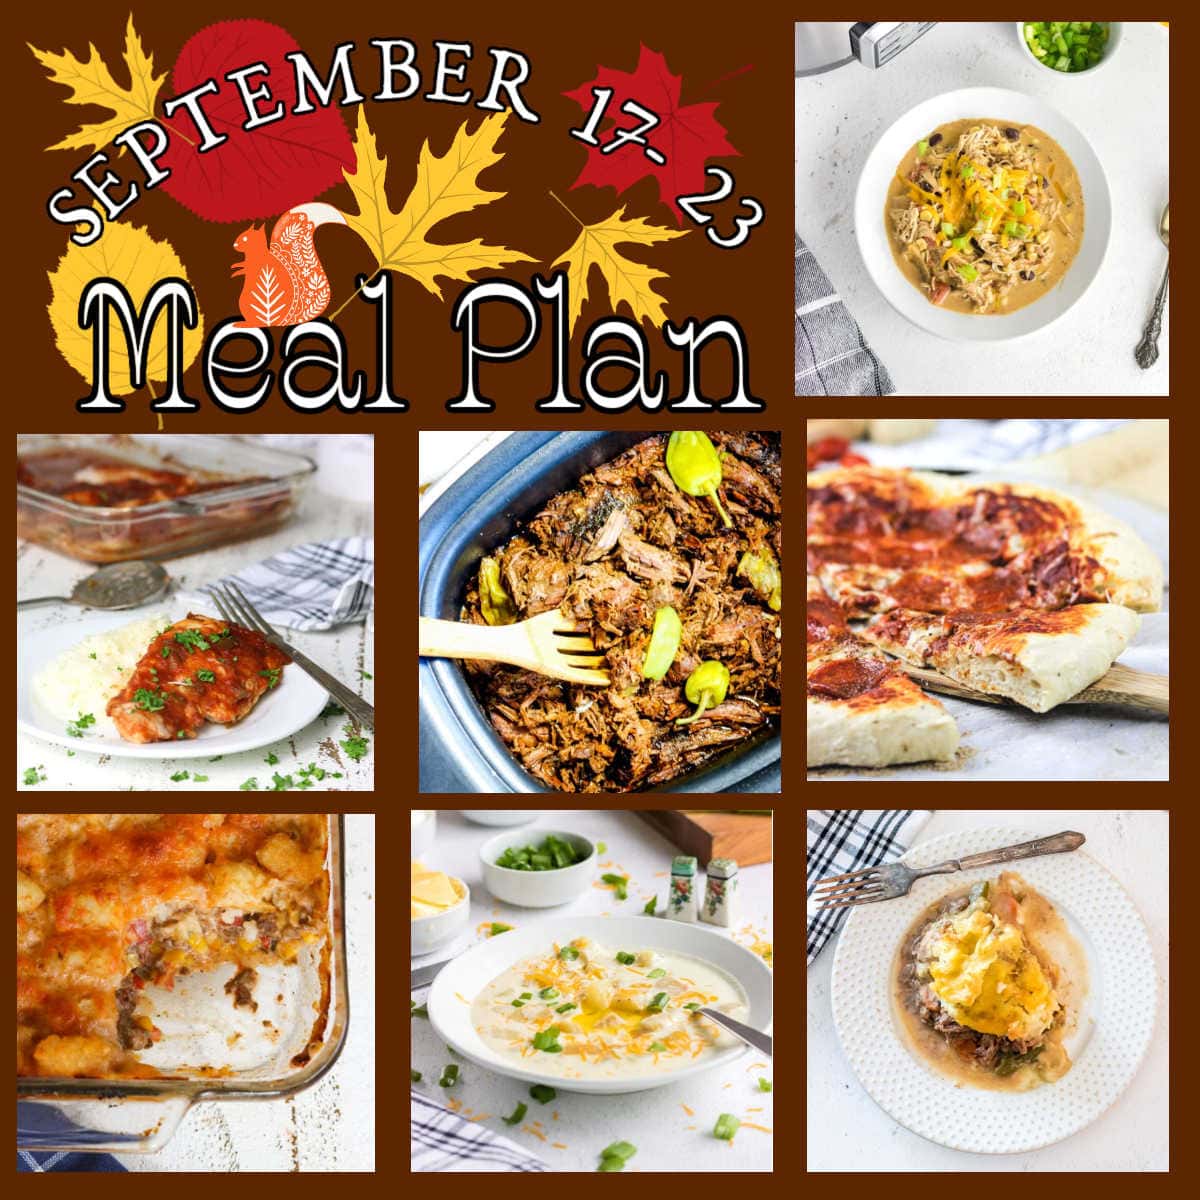 Collage of images from the September 17 through 23 meal plan.